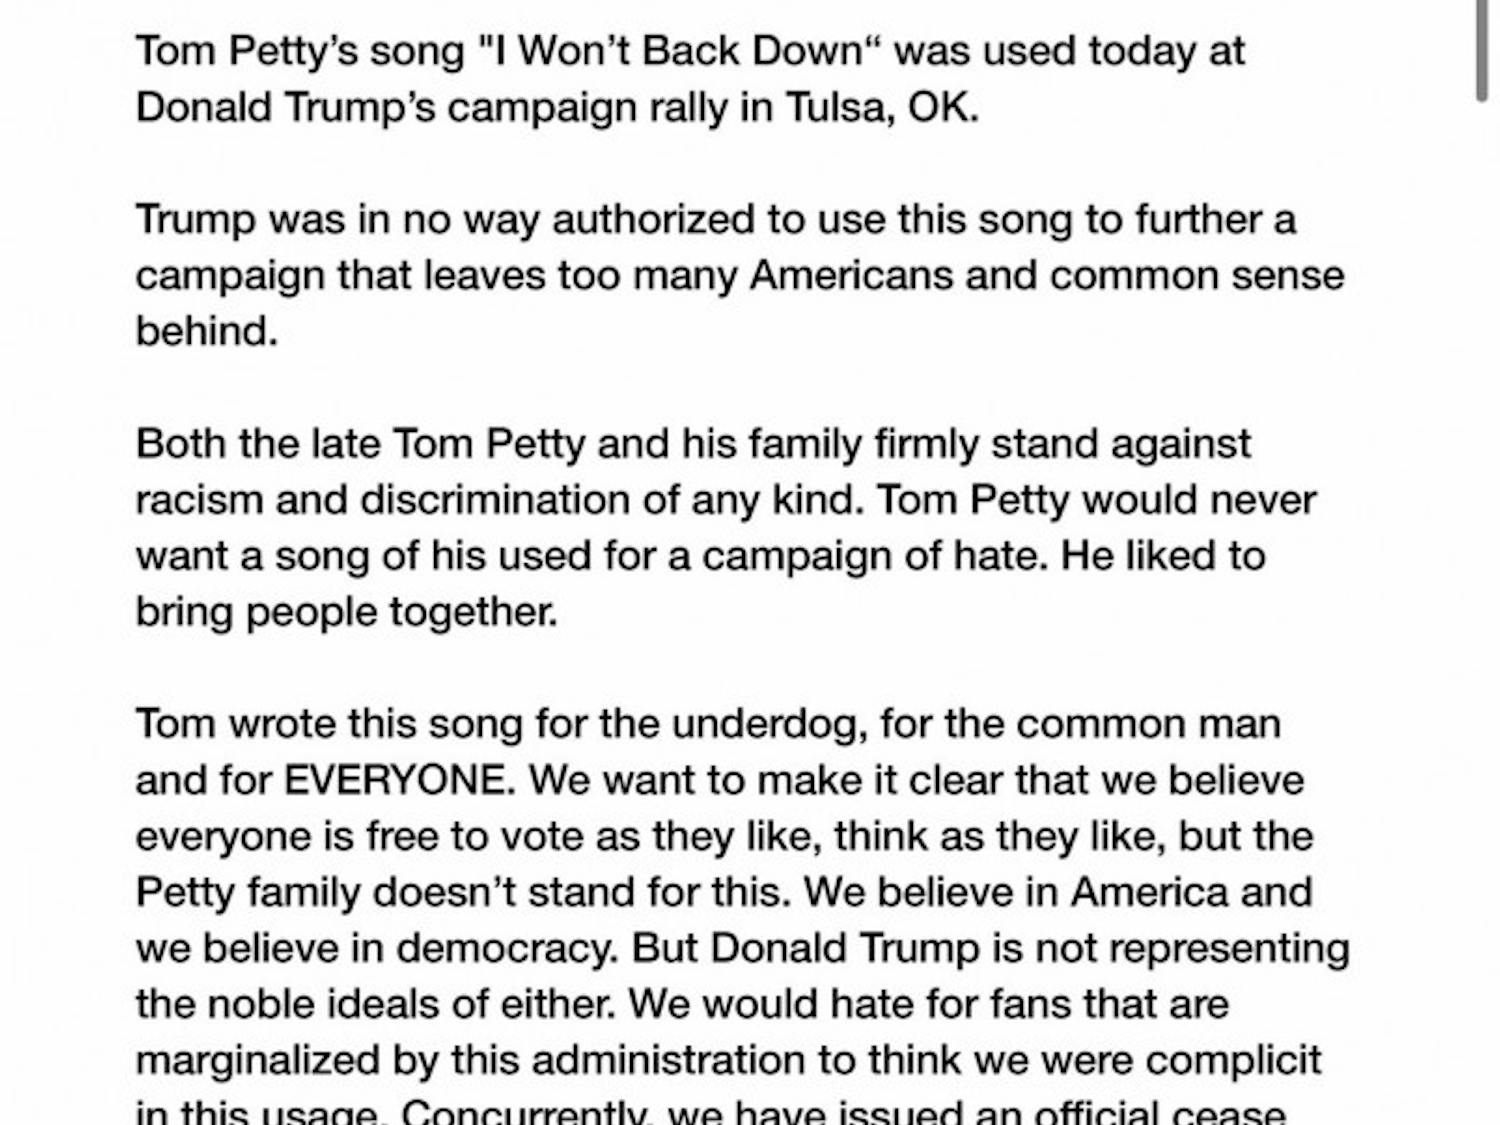 On June 20, the Petty family issued an official cease and desist warning to the Trump campaign regarding the usage of the song “I Won’t Back Down” at an Oklahoma rally.